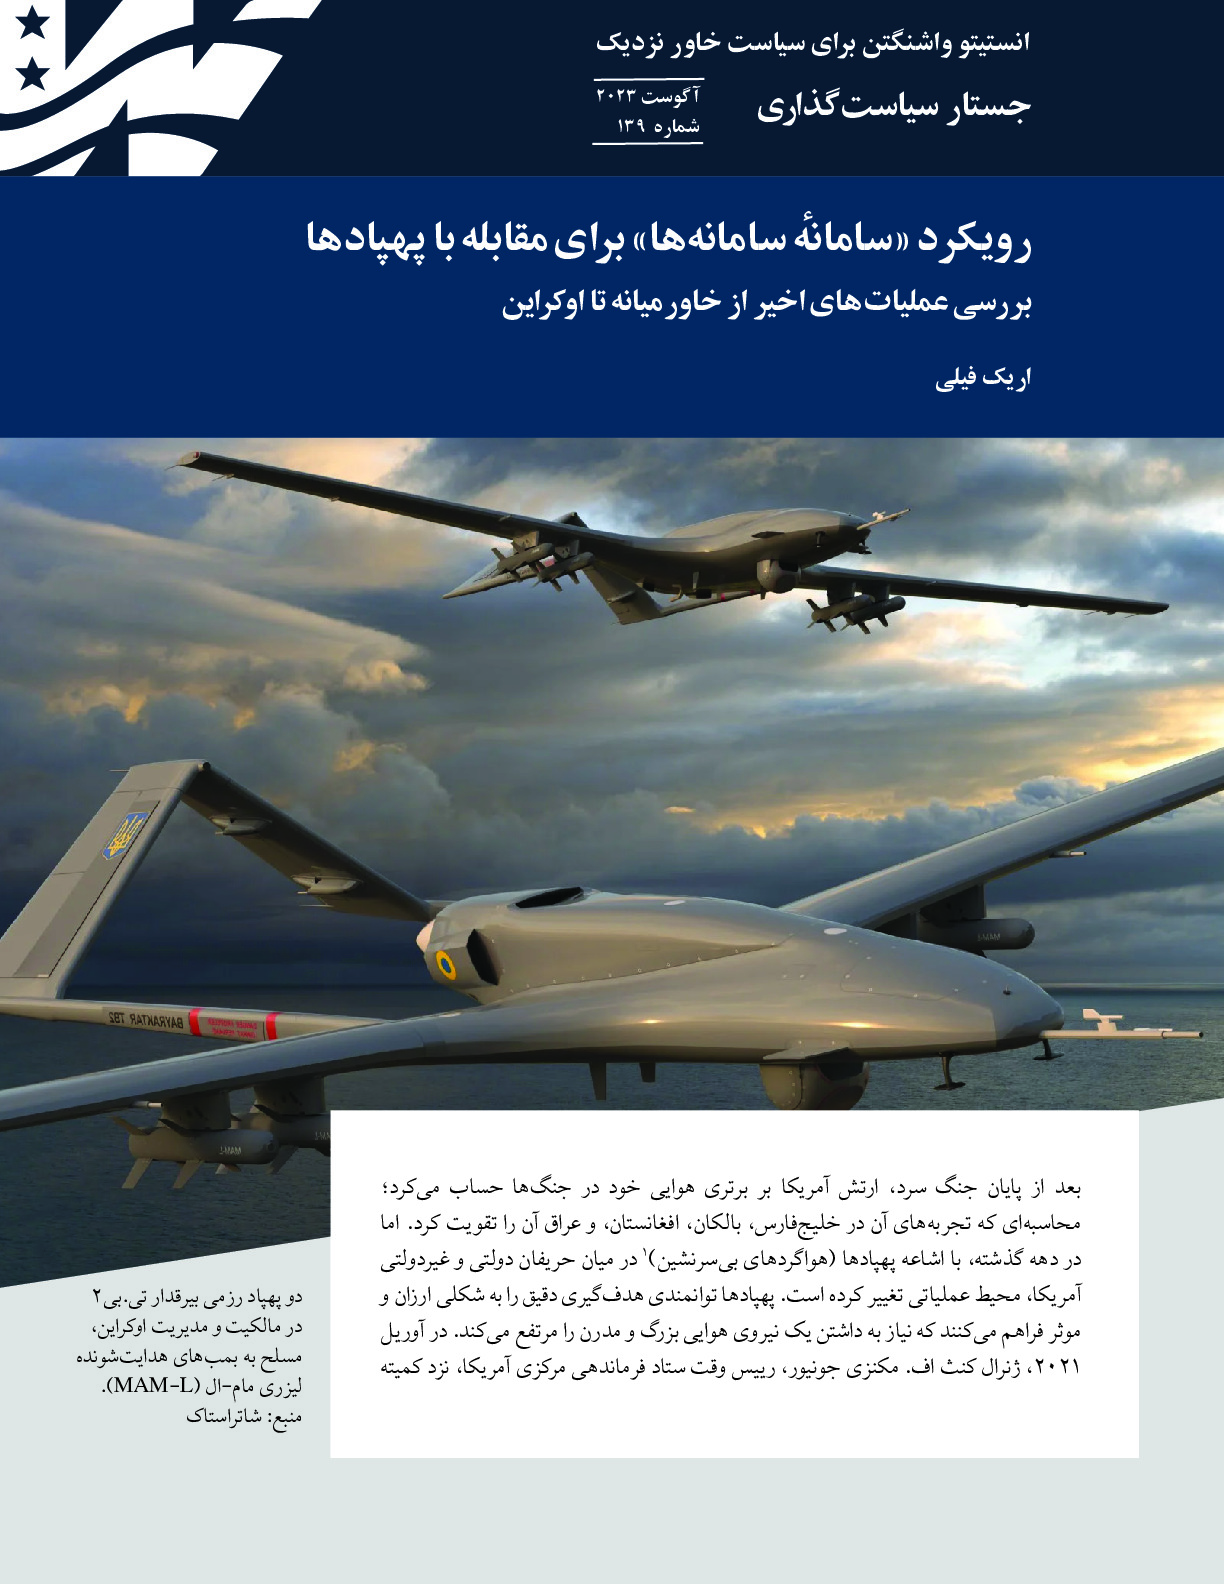 A System of Systems Approach to Countering Drones - Persian edition.pdf